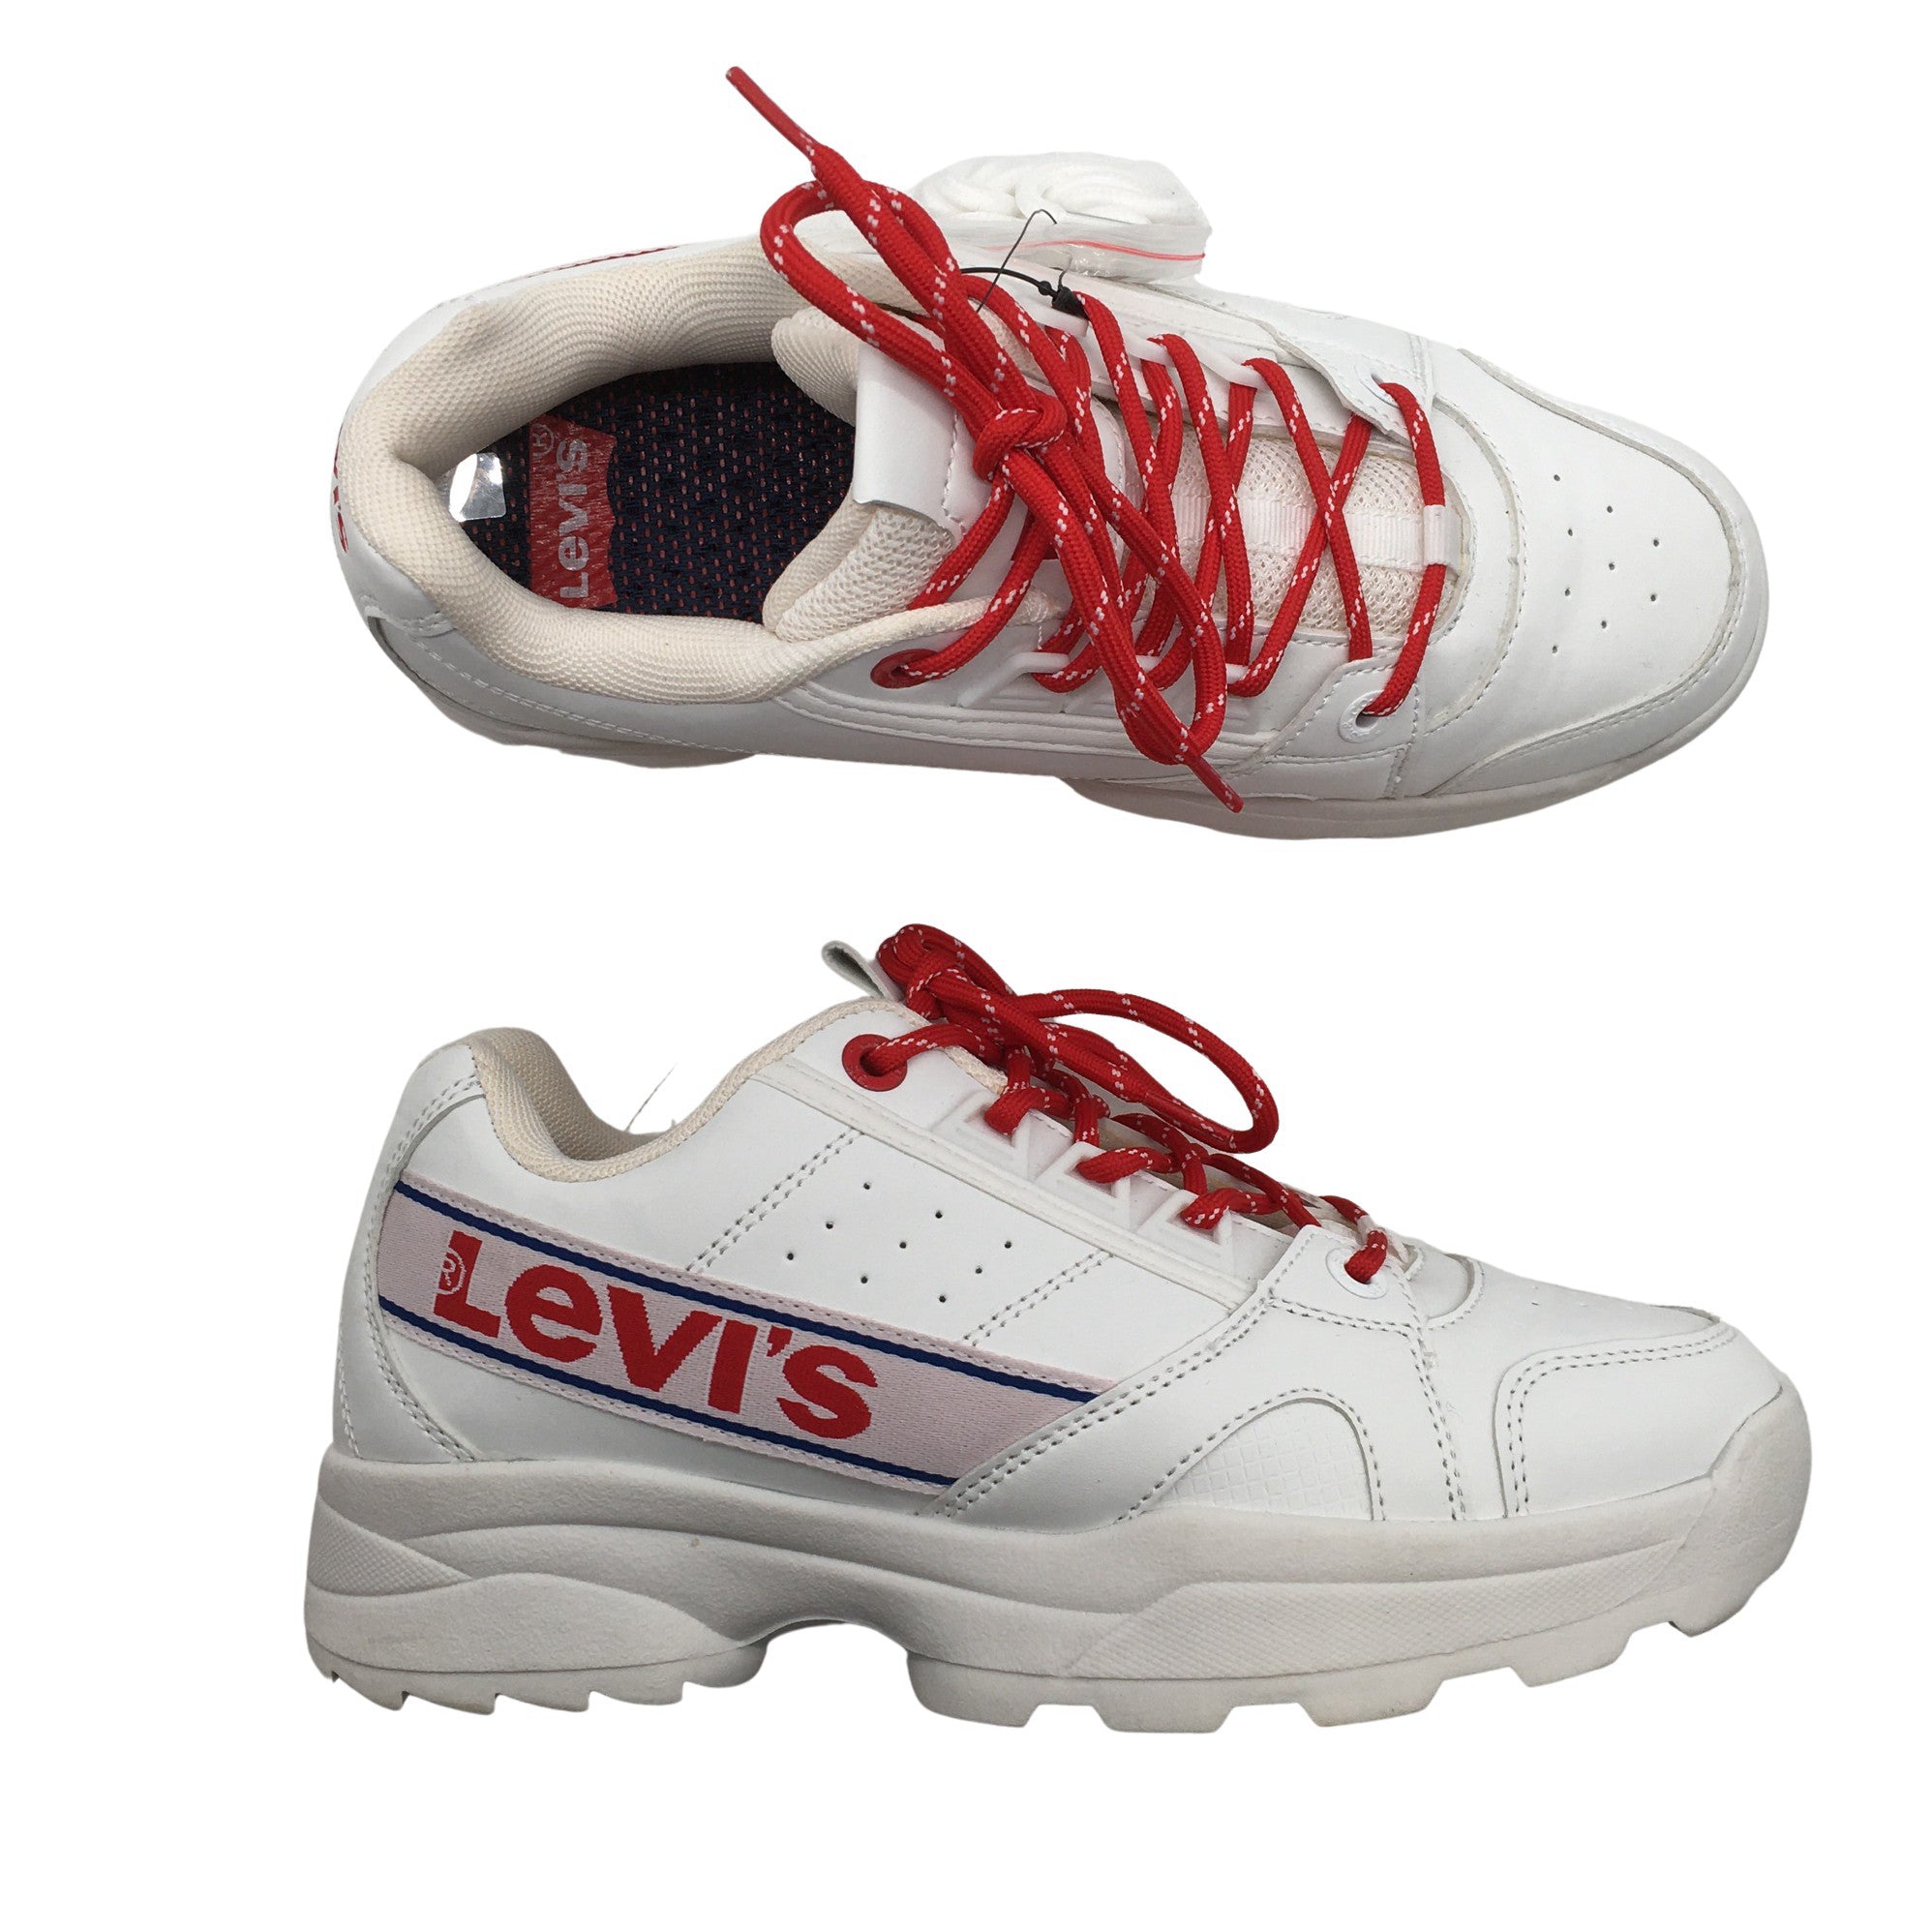 Women's Levi's Casual sneakers, size 38 (White) | Emmy